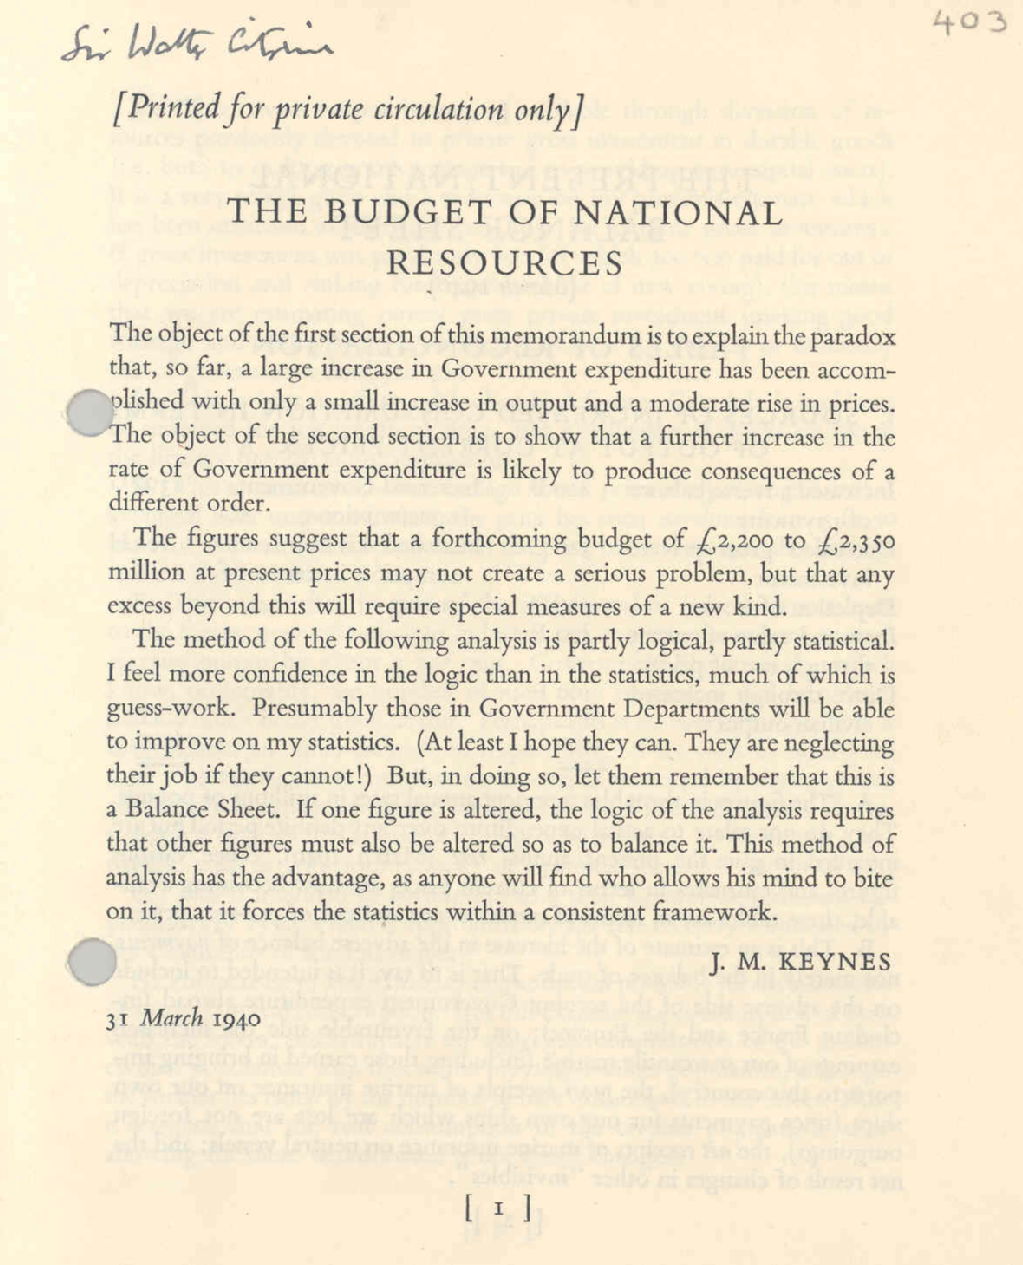 'The Budget of National Resources', 31 March 1940